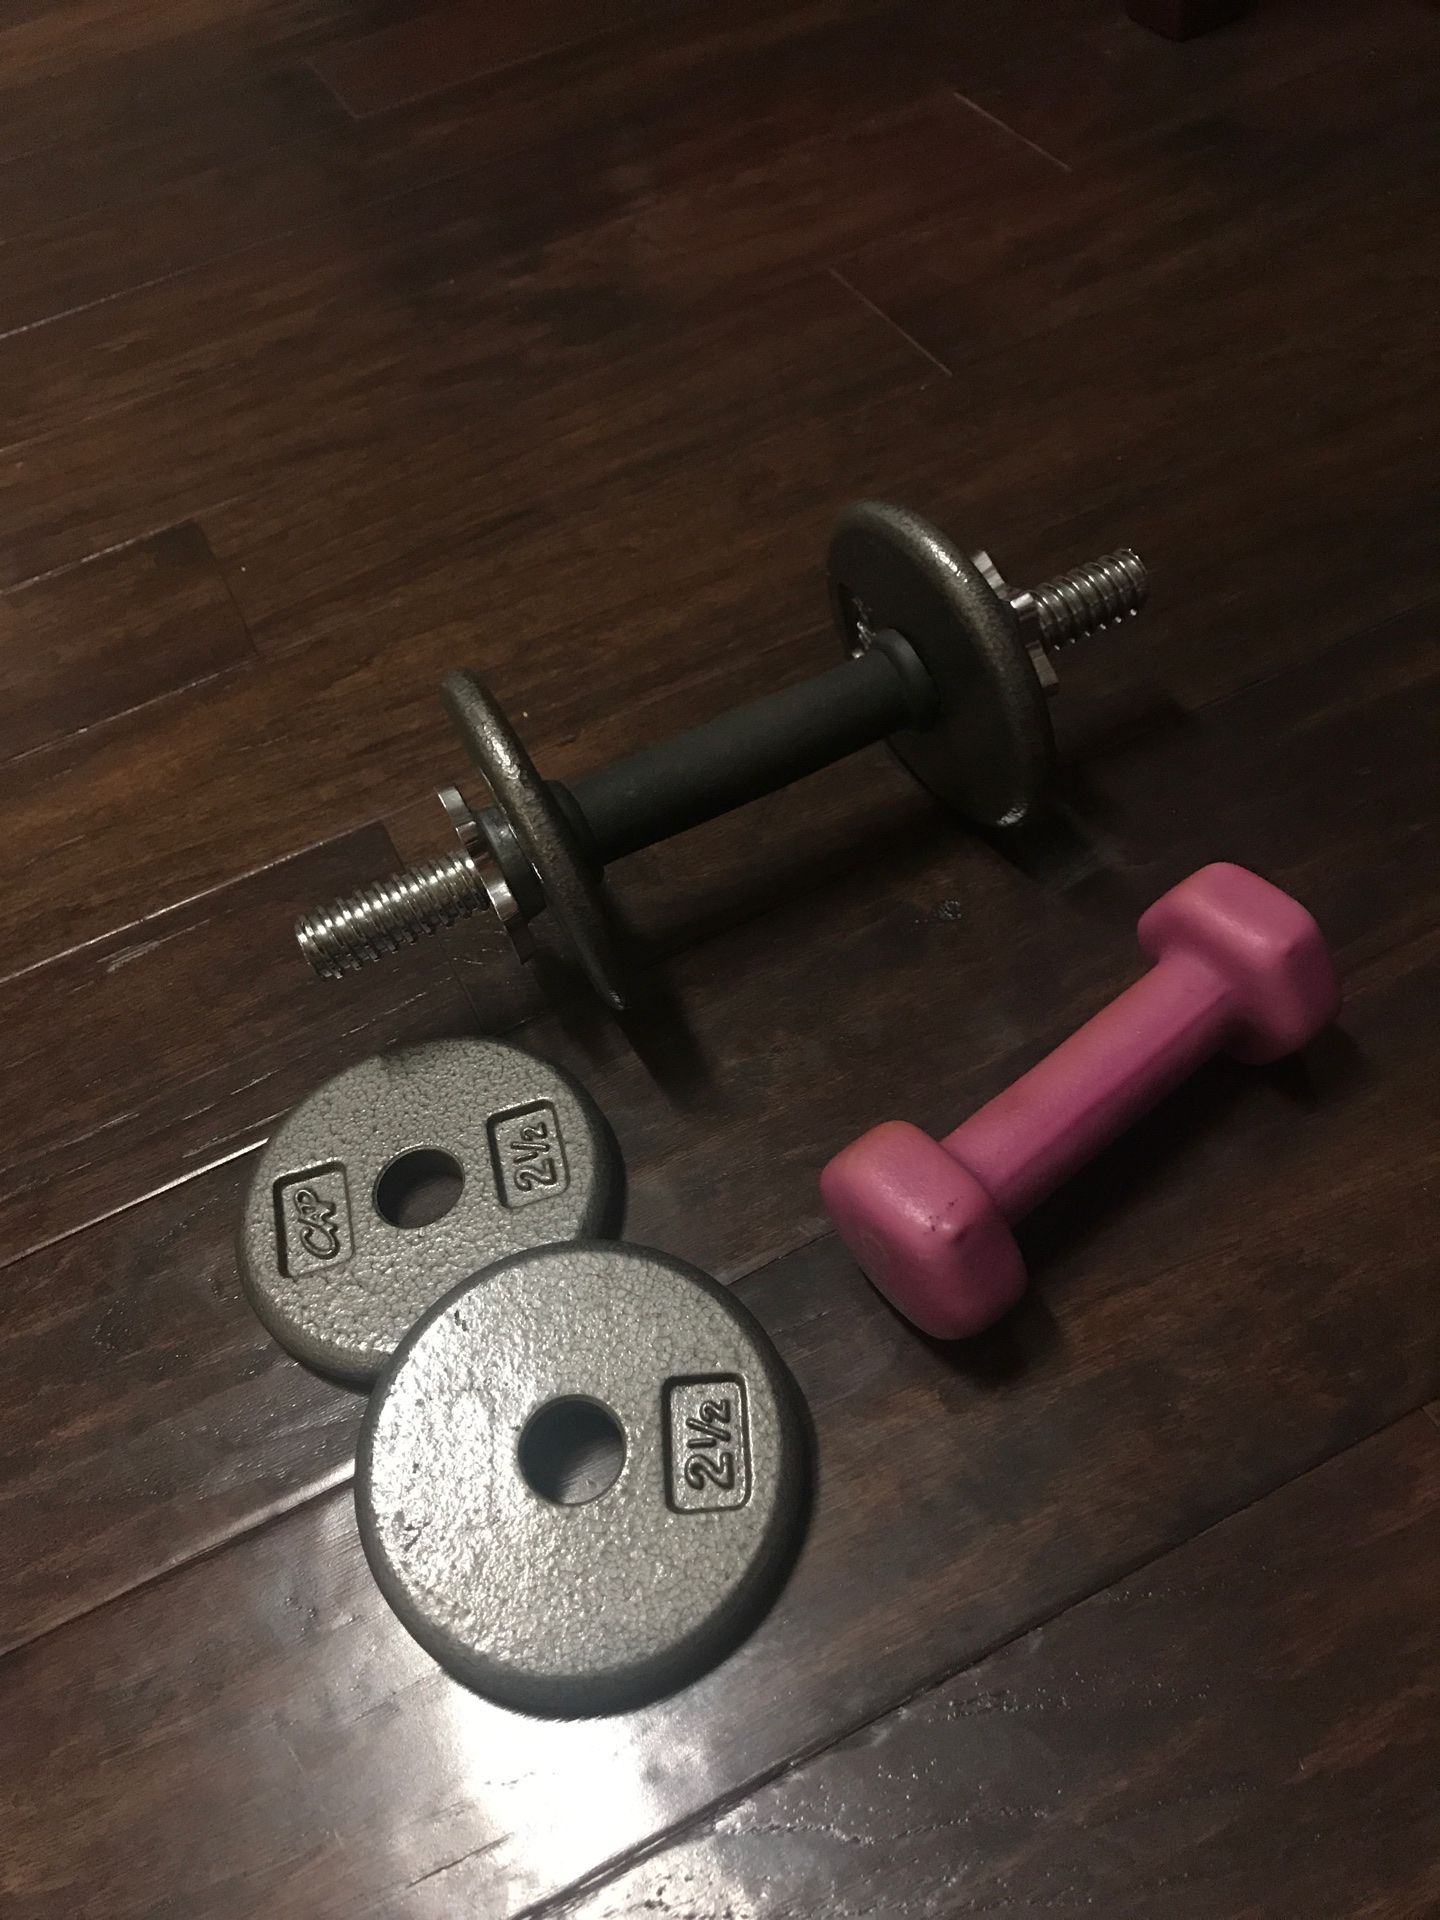 Sport weights for building muscles